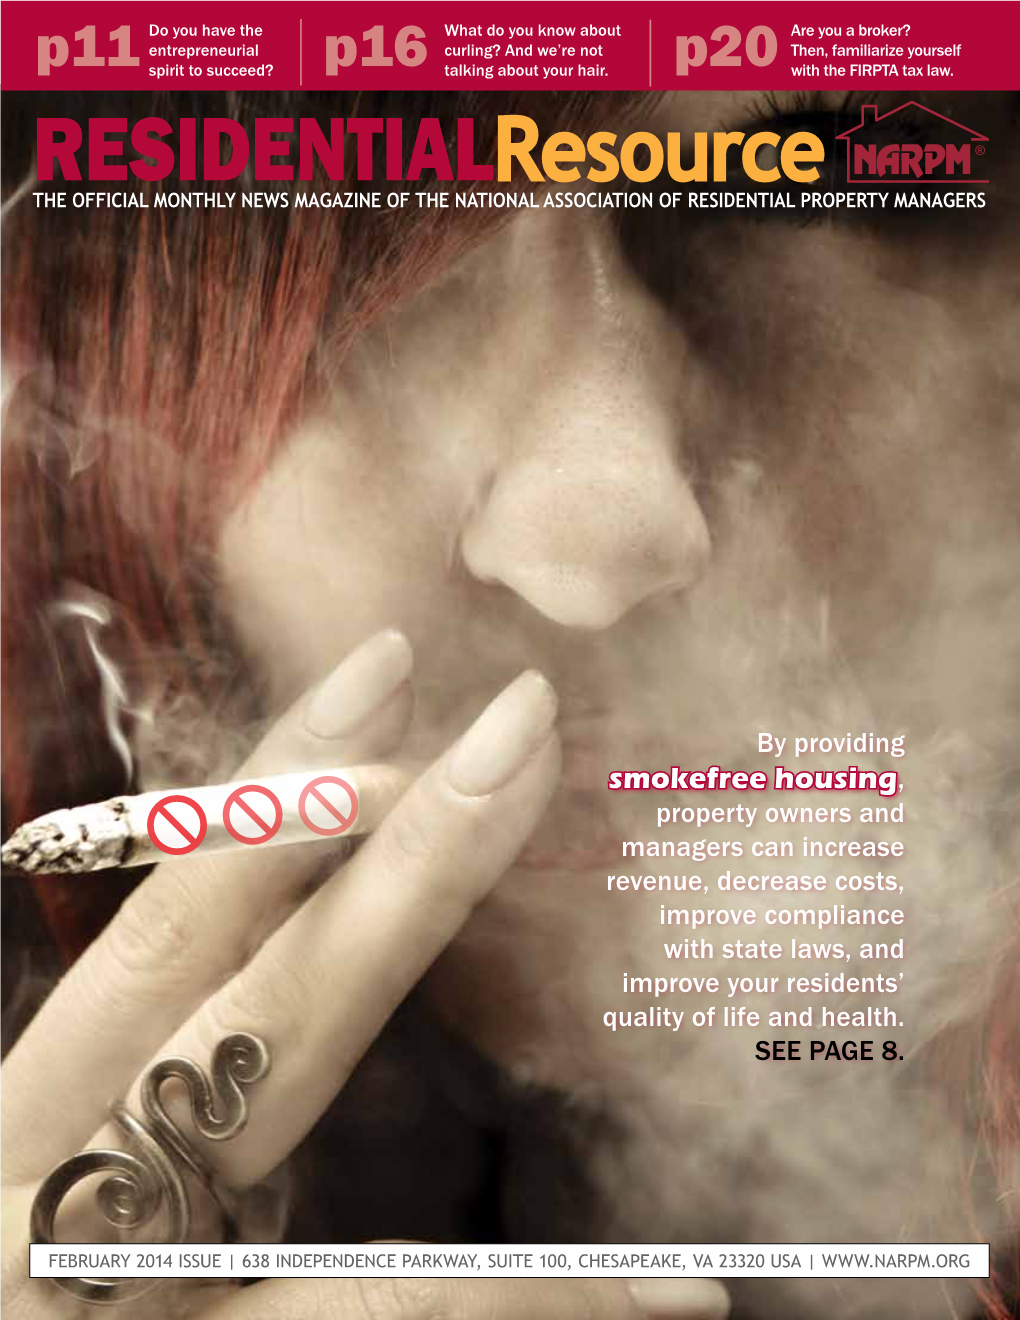 Residentialresource the OFFICIAL MONTHLY NEWS MAGAZINE of the NATIONAL ASSOCIATION of RESIDENTIAL PROPERTY MANAGERS